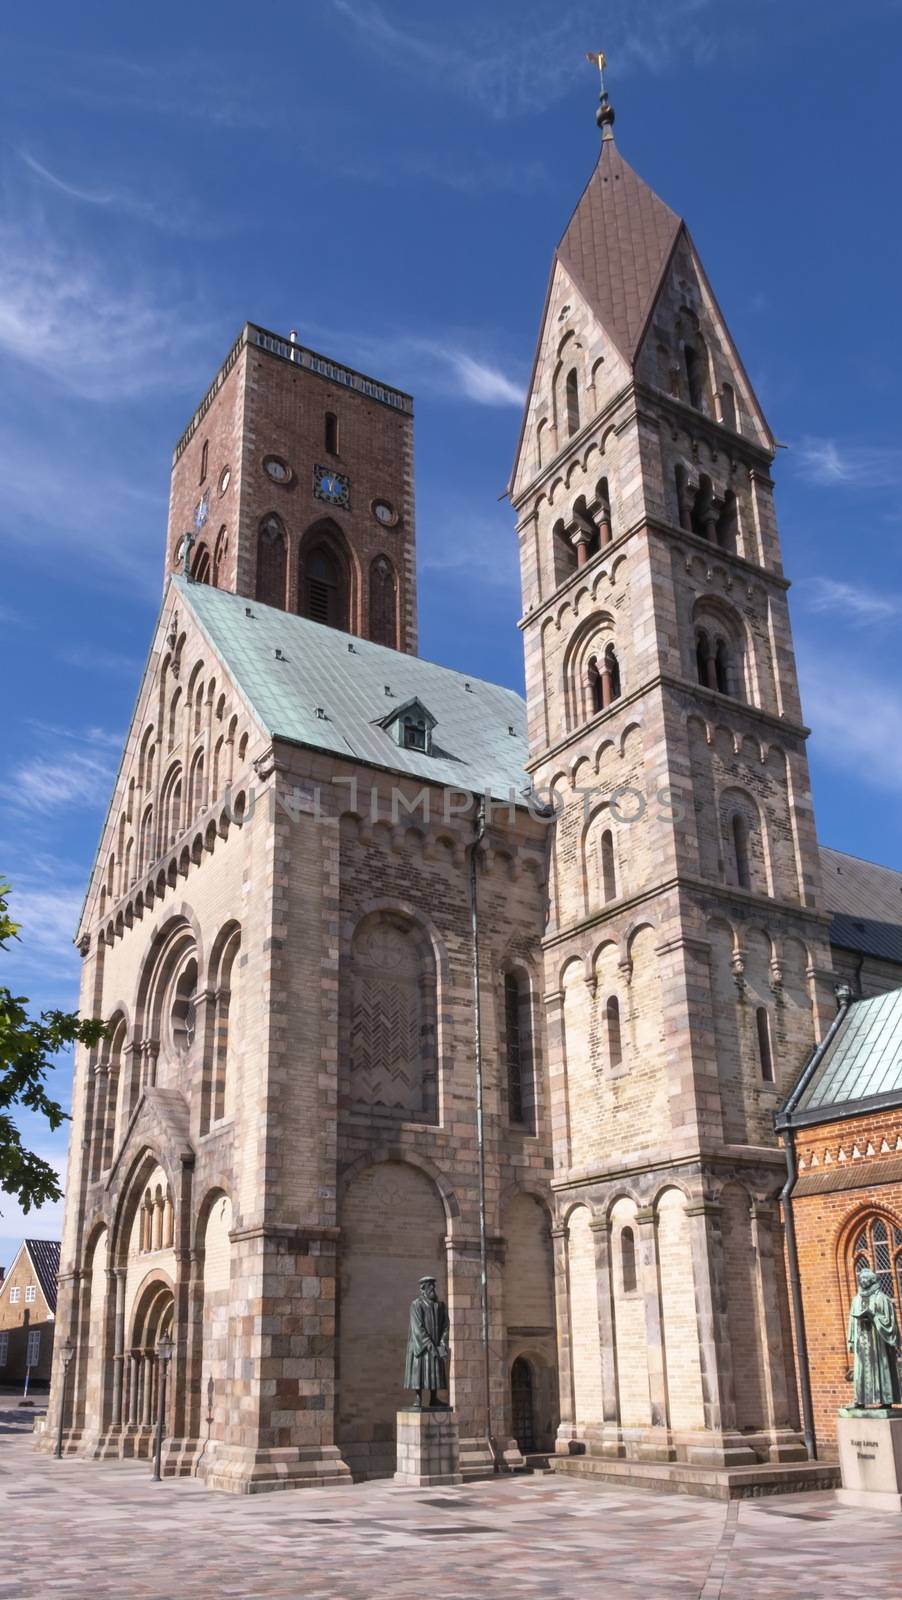 Medieval cathedral, Church of our Lady in Ribe by day, Denmark